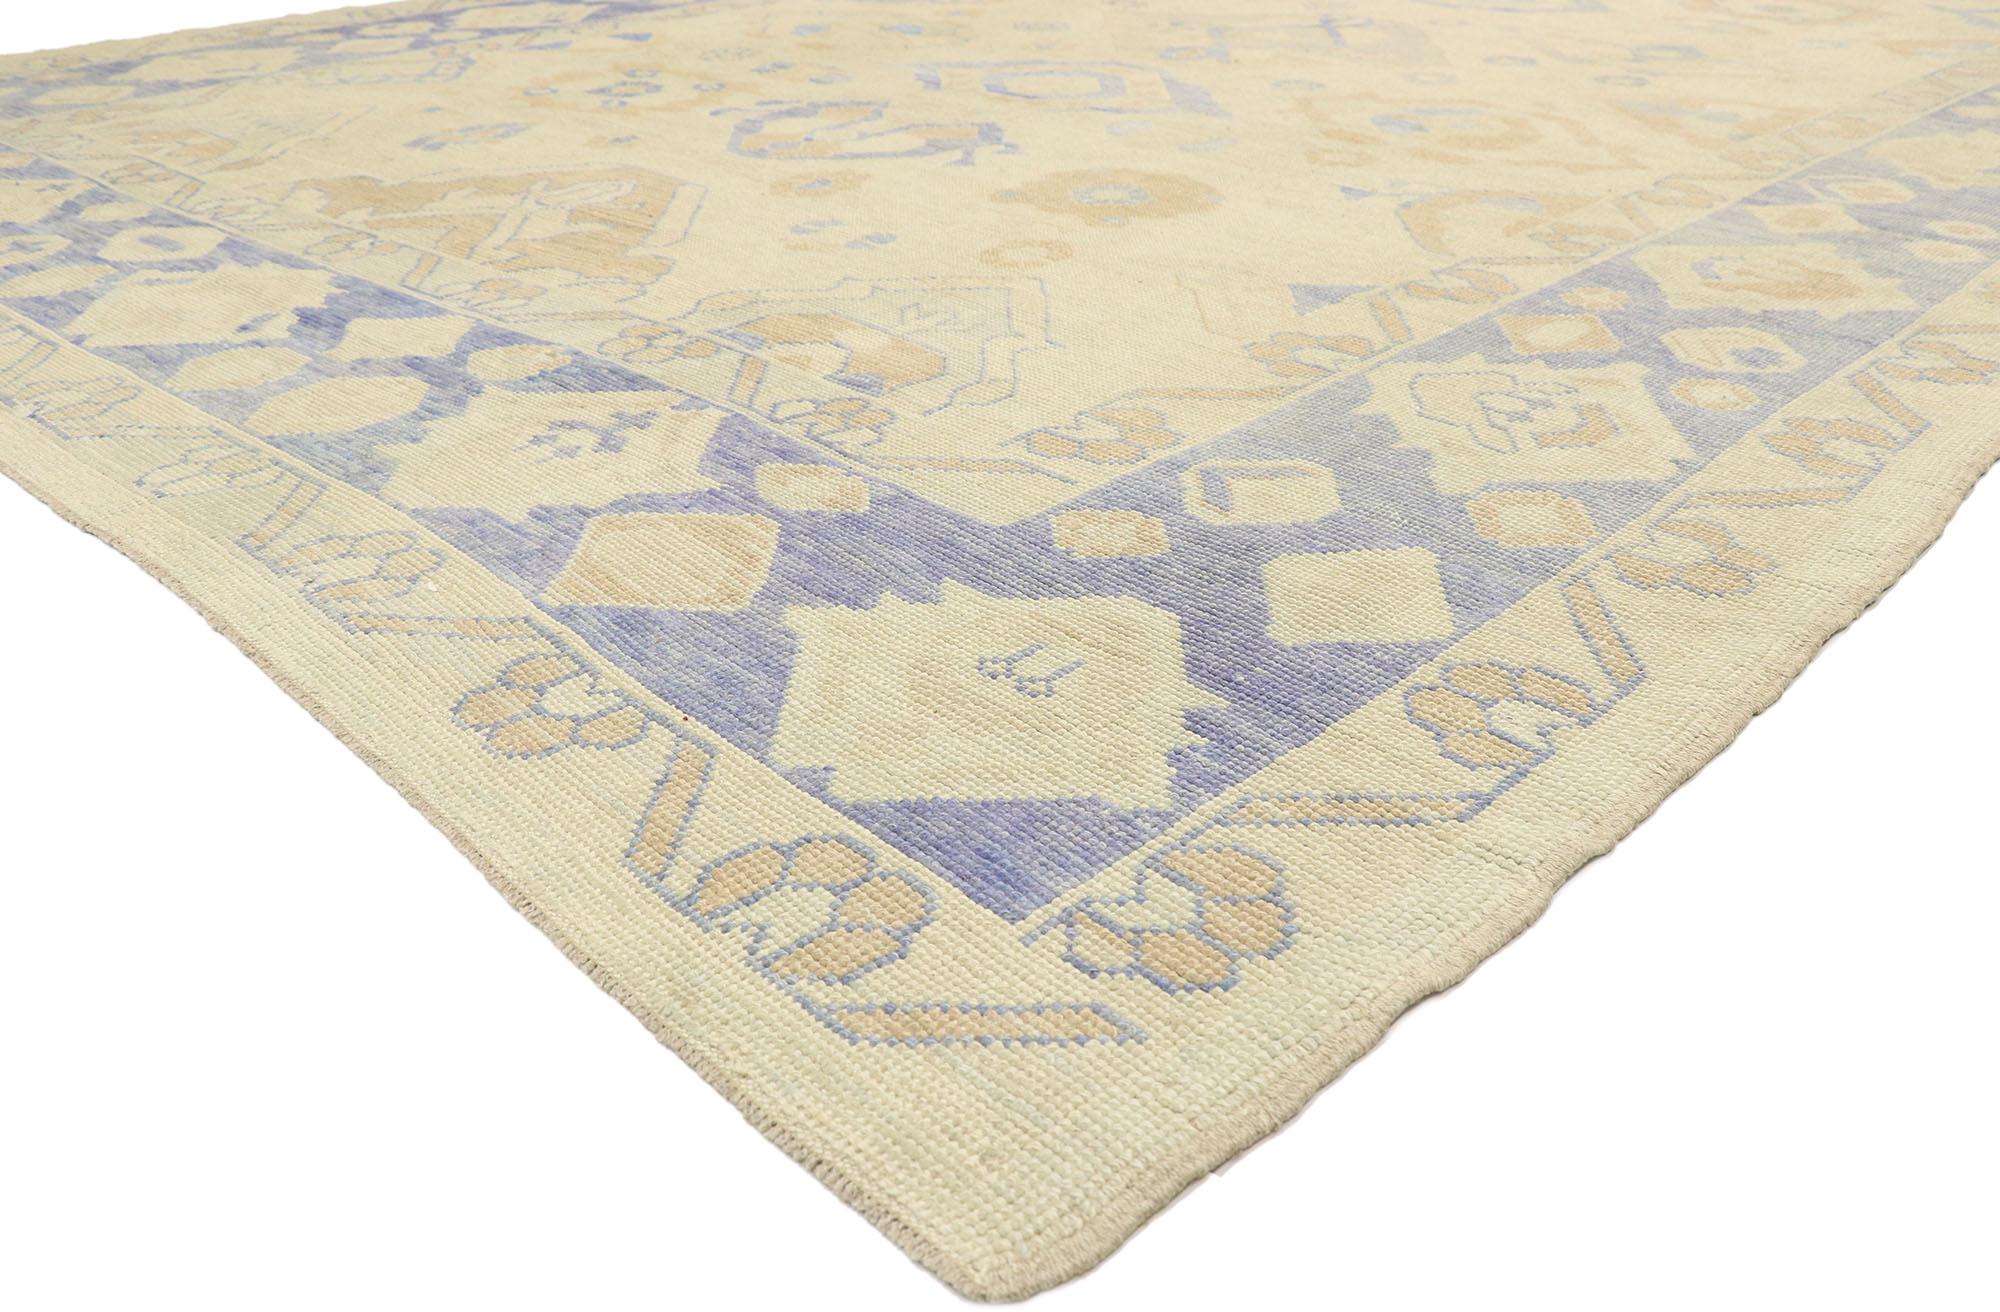 51613 New Contemporary Turkish Oushak rug with Modern Martha's Vineyard style. Blending elements from the modern world with light and airy colors, this hand knotted wool contemporary Oushak style area rug will boost the coziness factor in nearly any